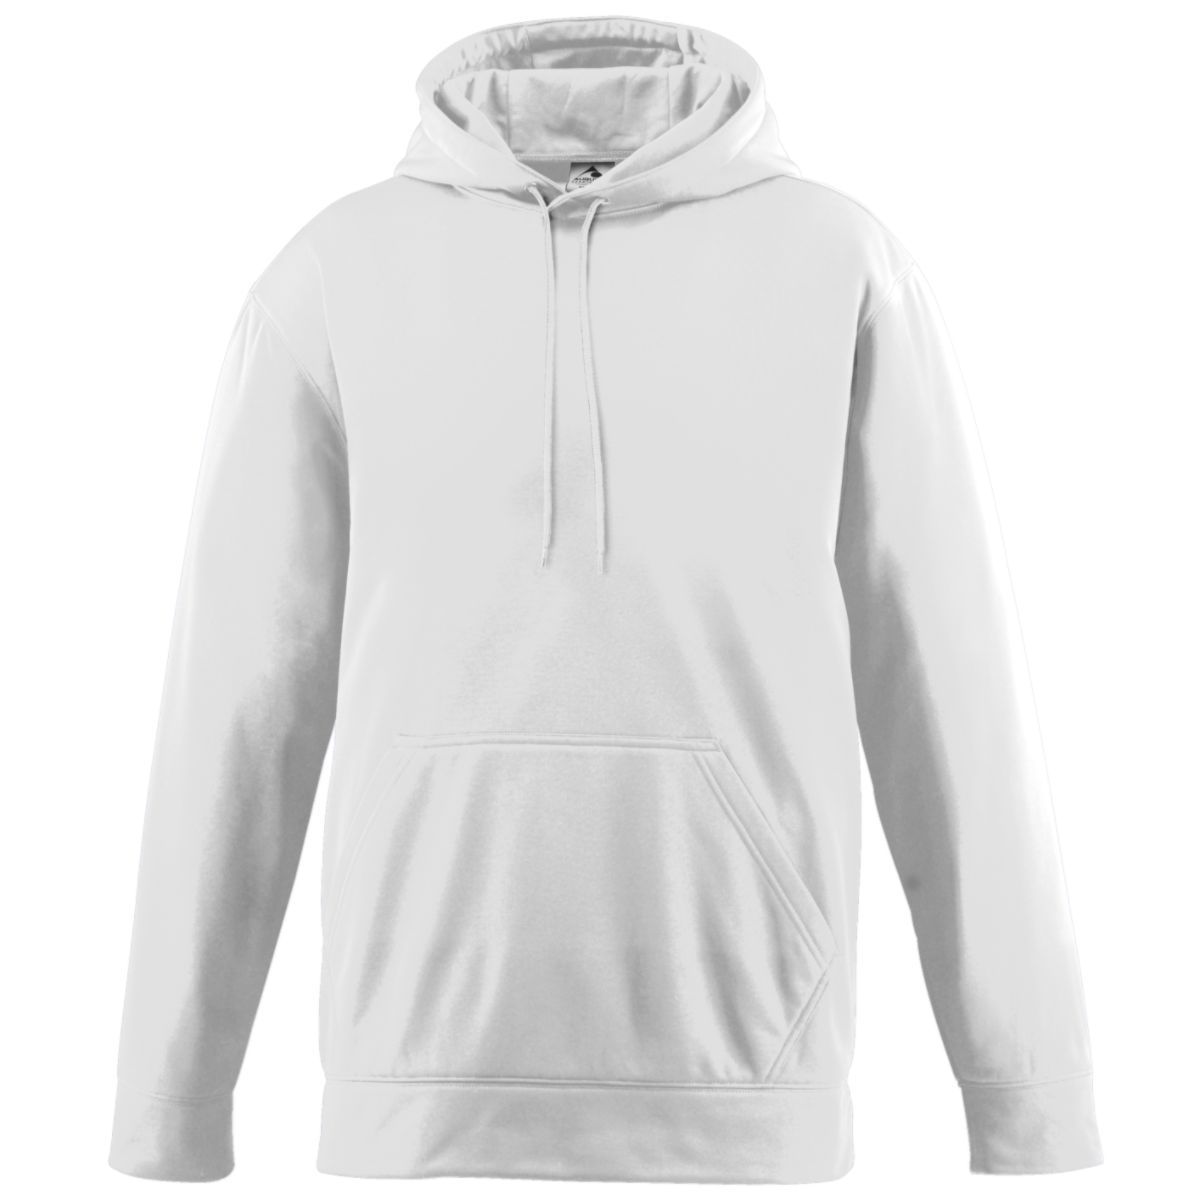 Augusta Sportswear Youth Wicking  Fleece Hoodie in White  -Part of the Youth, Youth-Sweatshirt, Augusta-Products, Outerwear product lines at KanaleyCreations.com